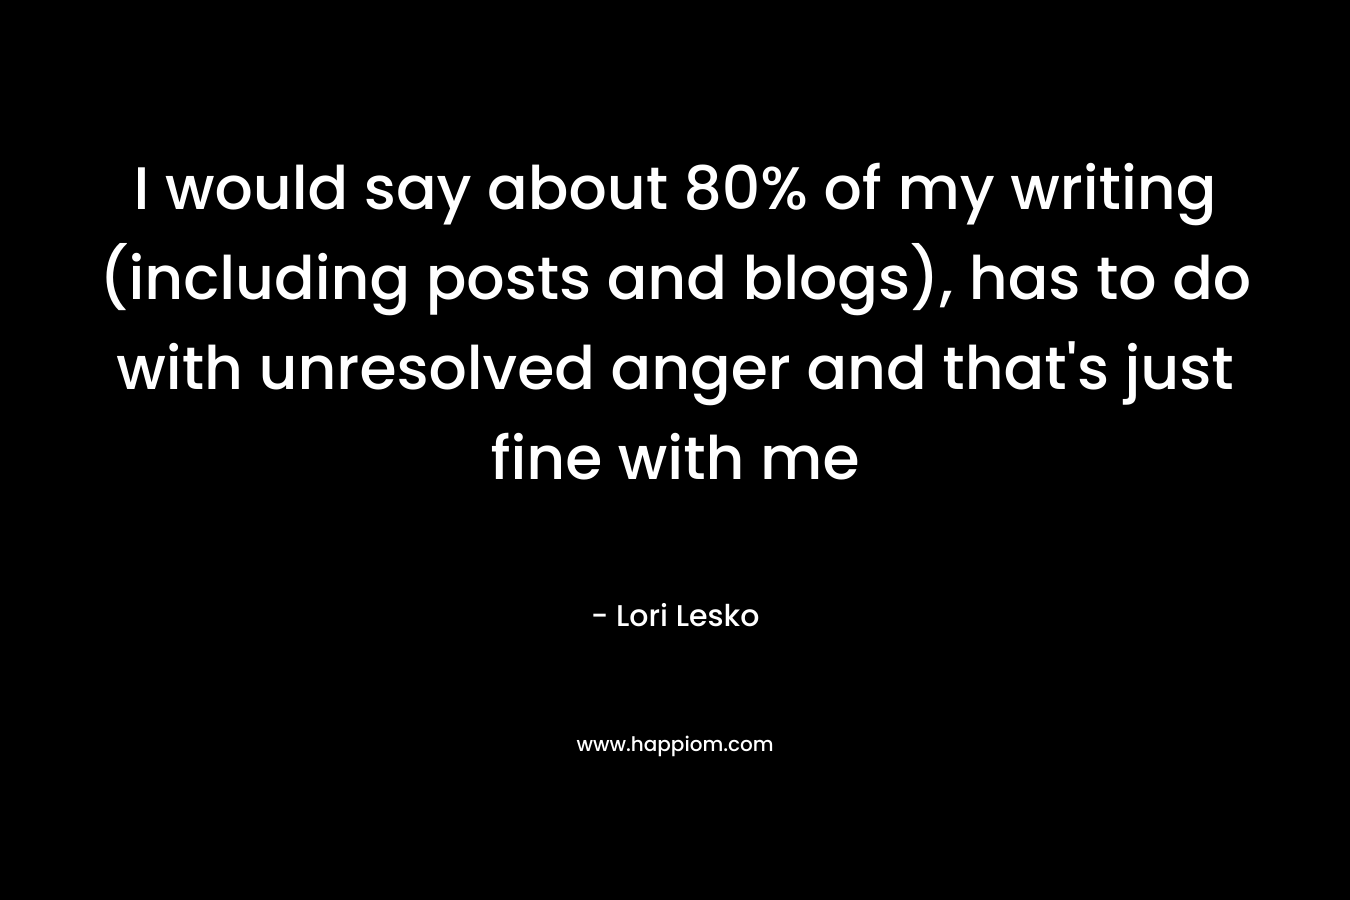 I would say about 80% of my writing (including posts and blogs), has to do with unresolved anger and that’s just fine with me – Lori Lesko